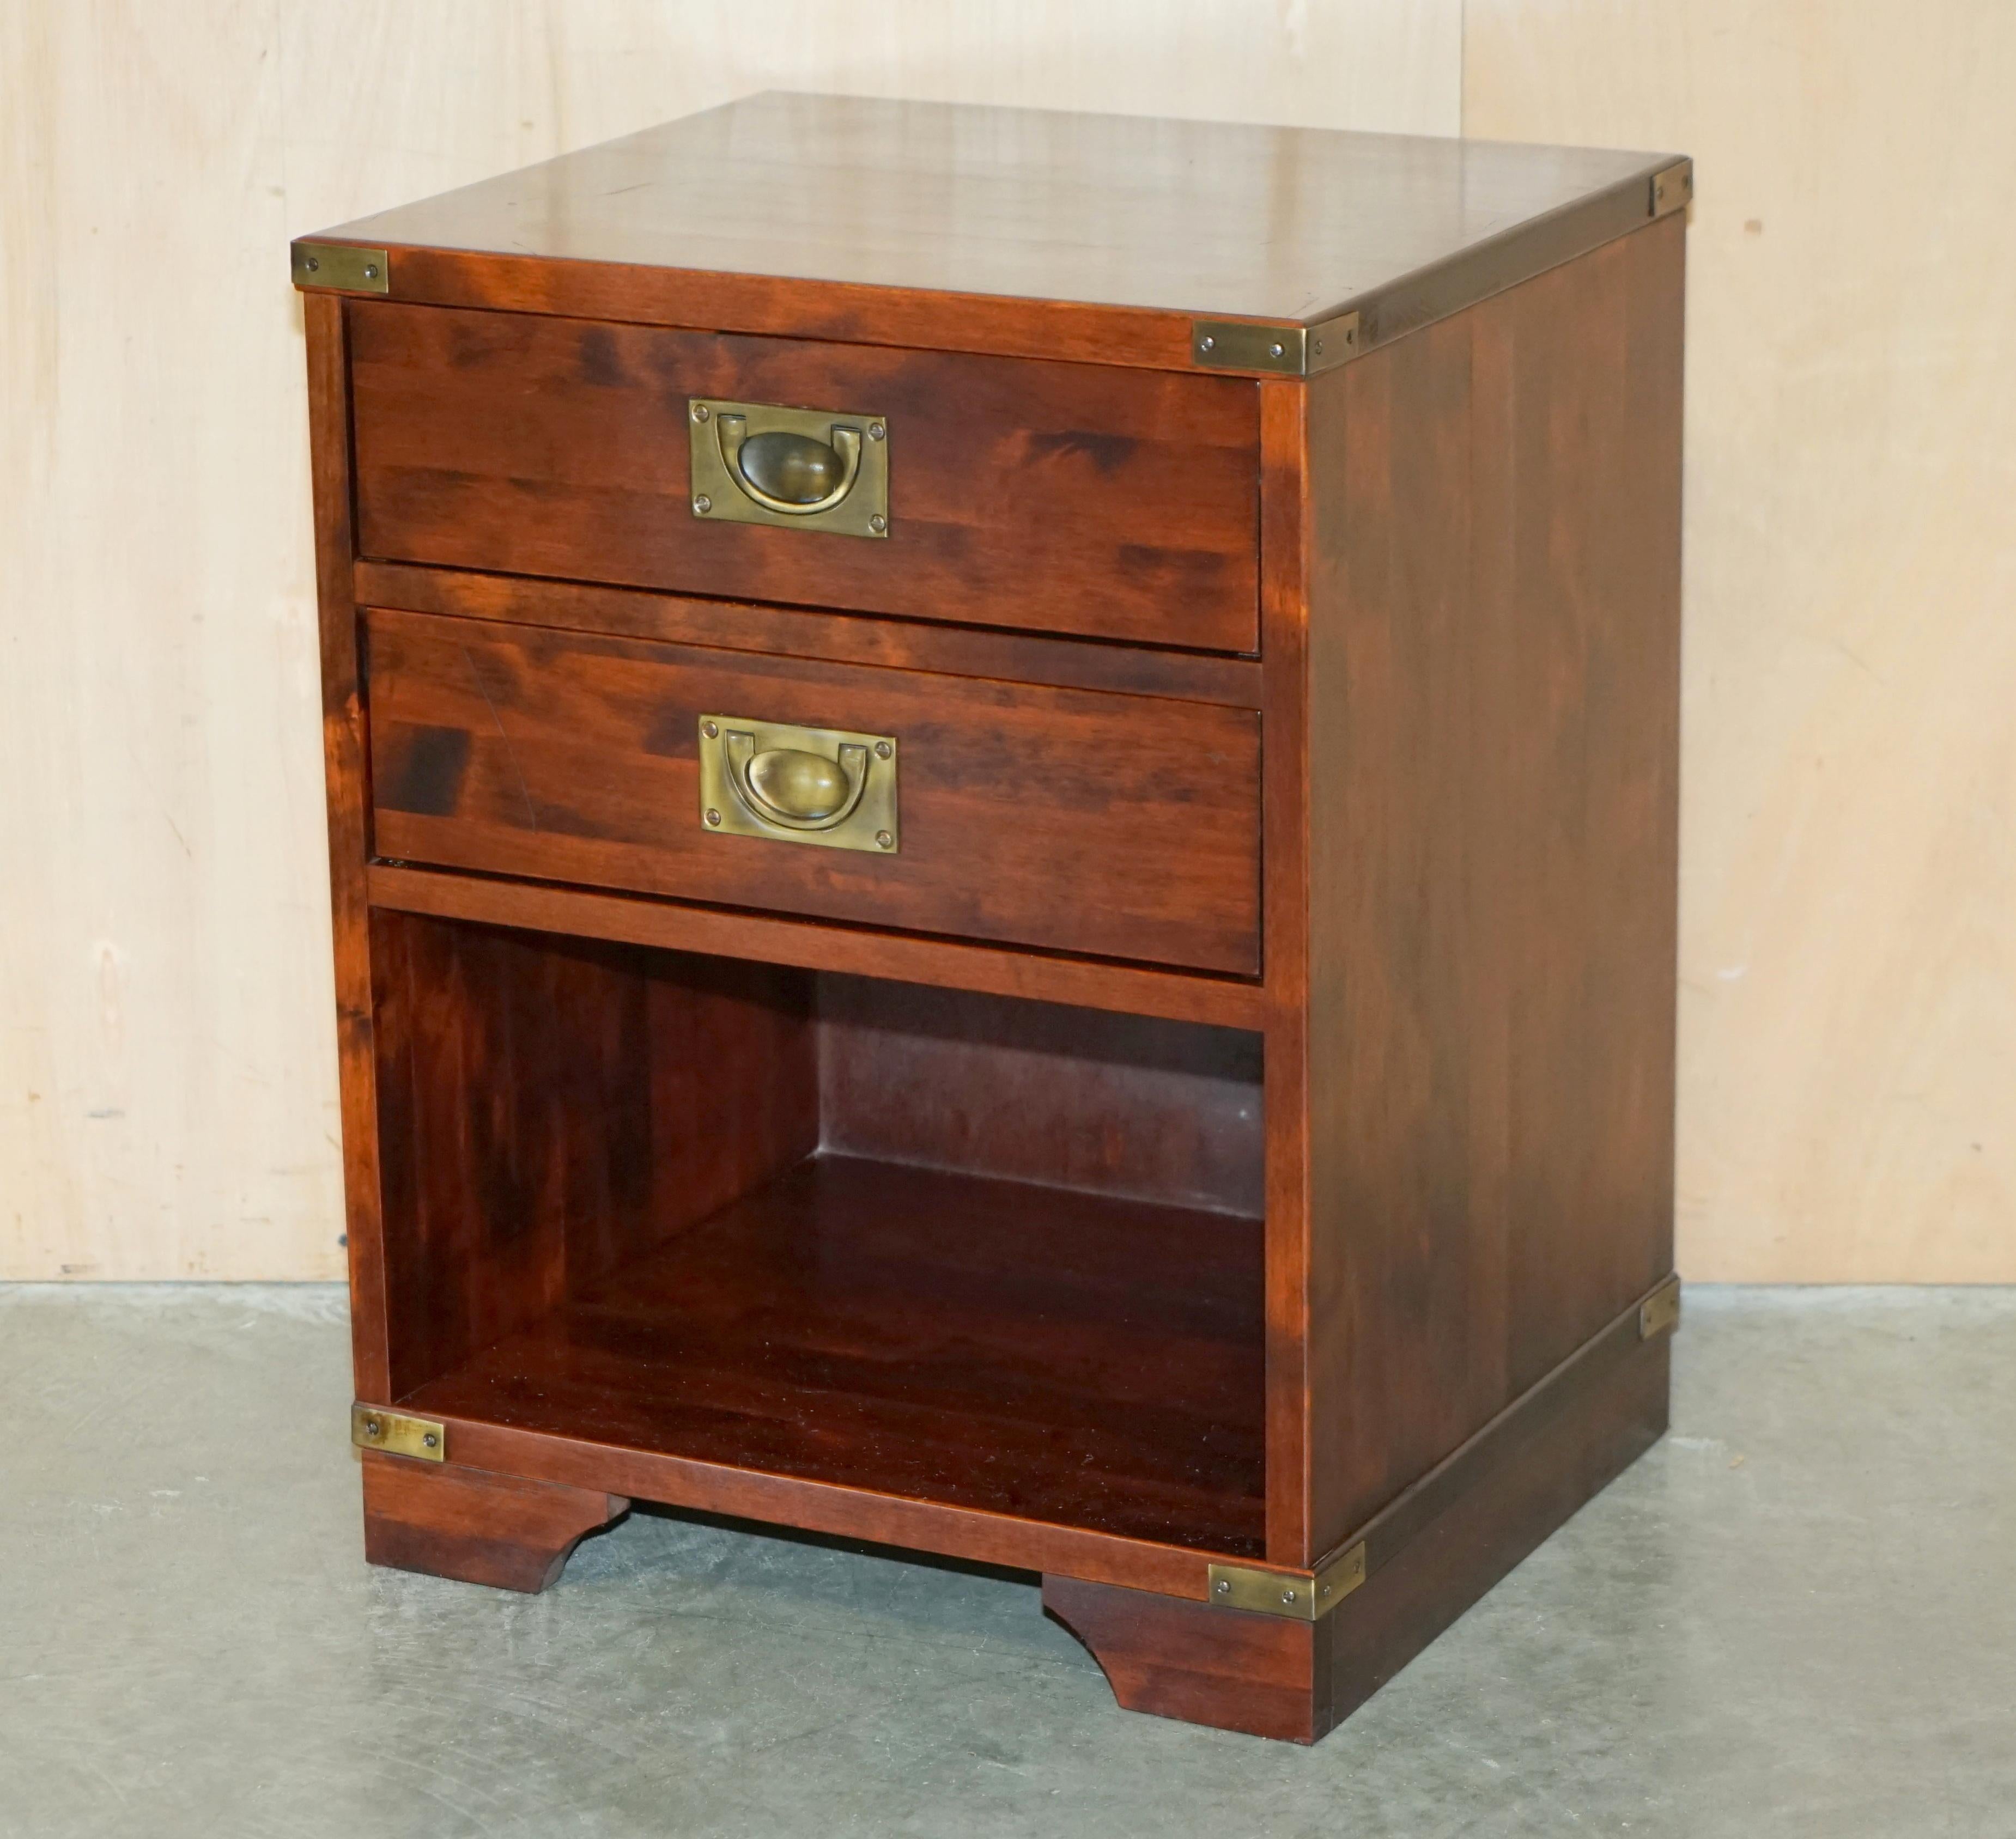 Campaign PAiR OF MILIARY CAMPAIGN SIDE END LAMP WINE BEDSIDE TABLE CHESTS WITH DRAWERS For Sale